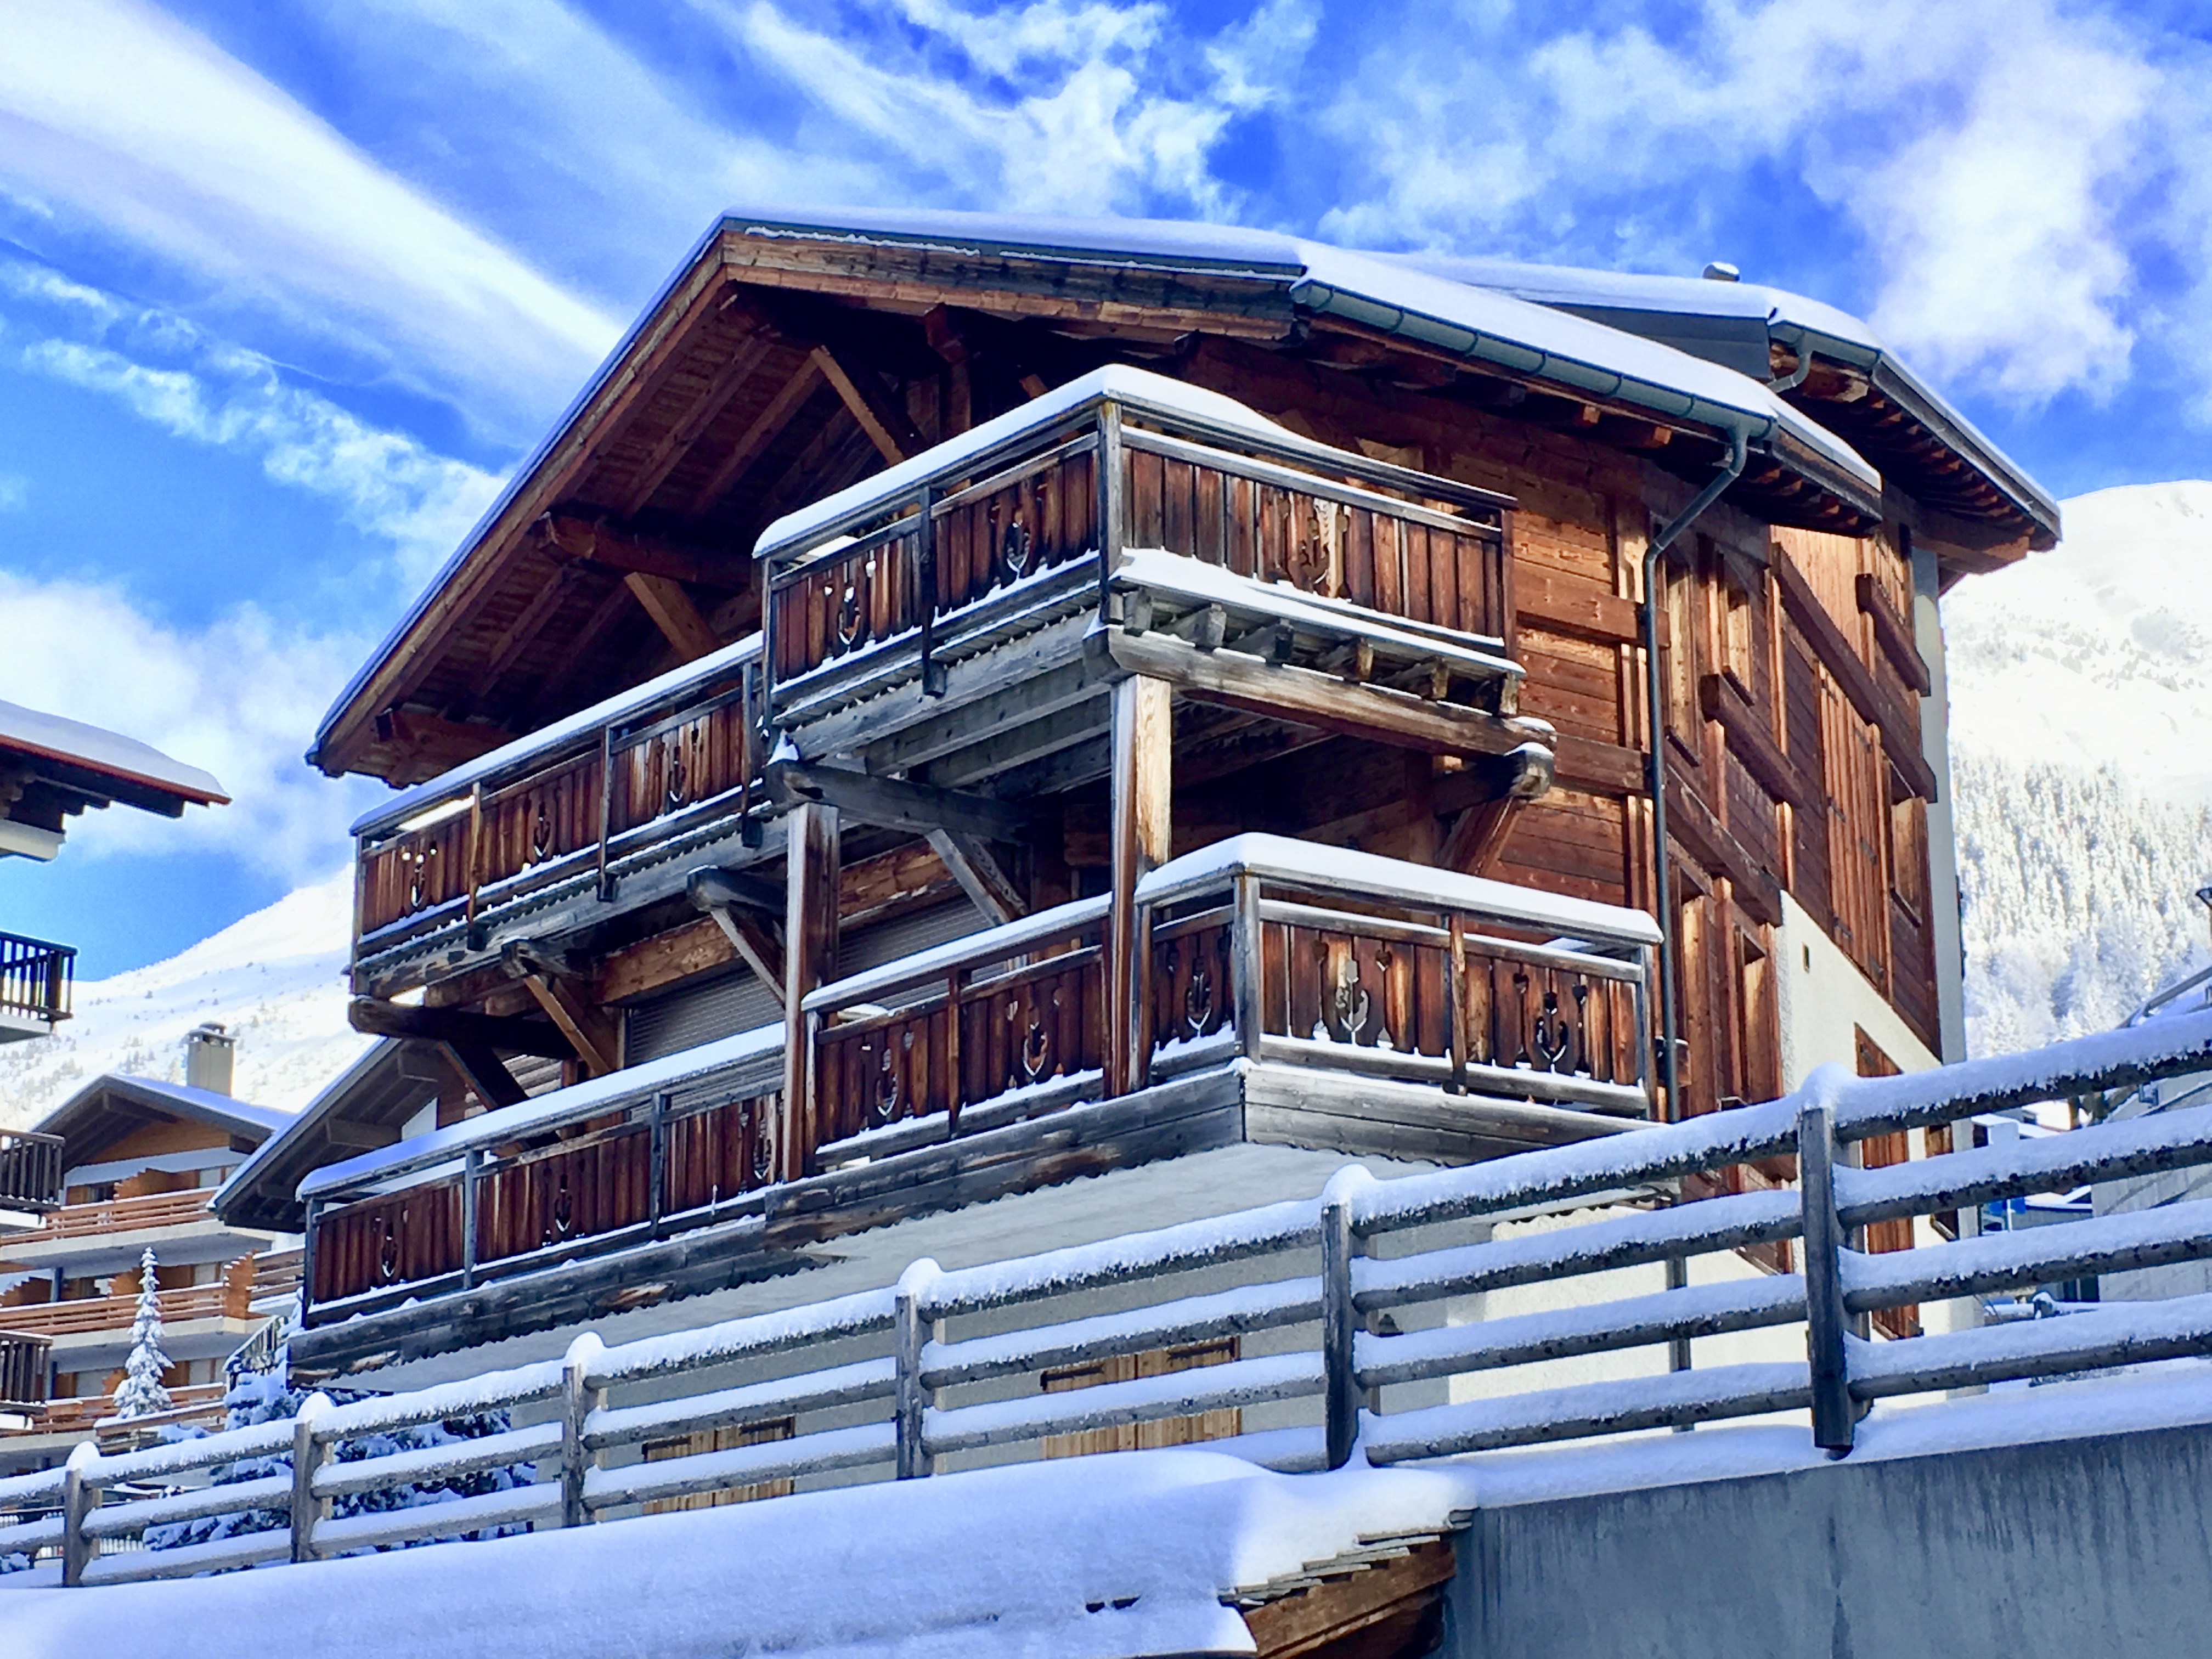 Full snow penthouse verbier in winter season on the roof and outside